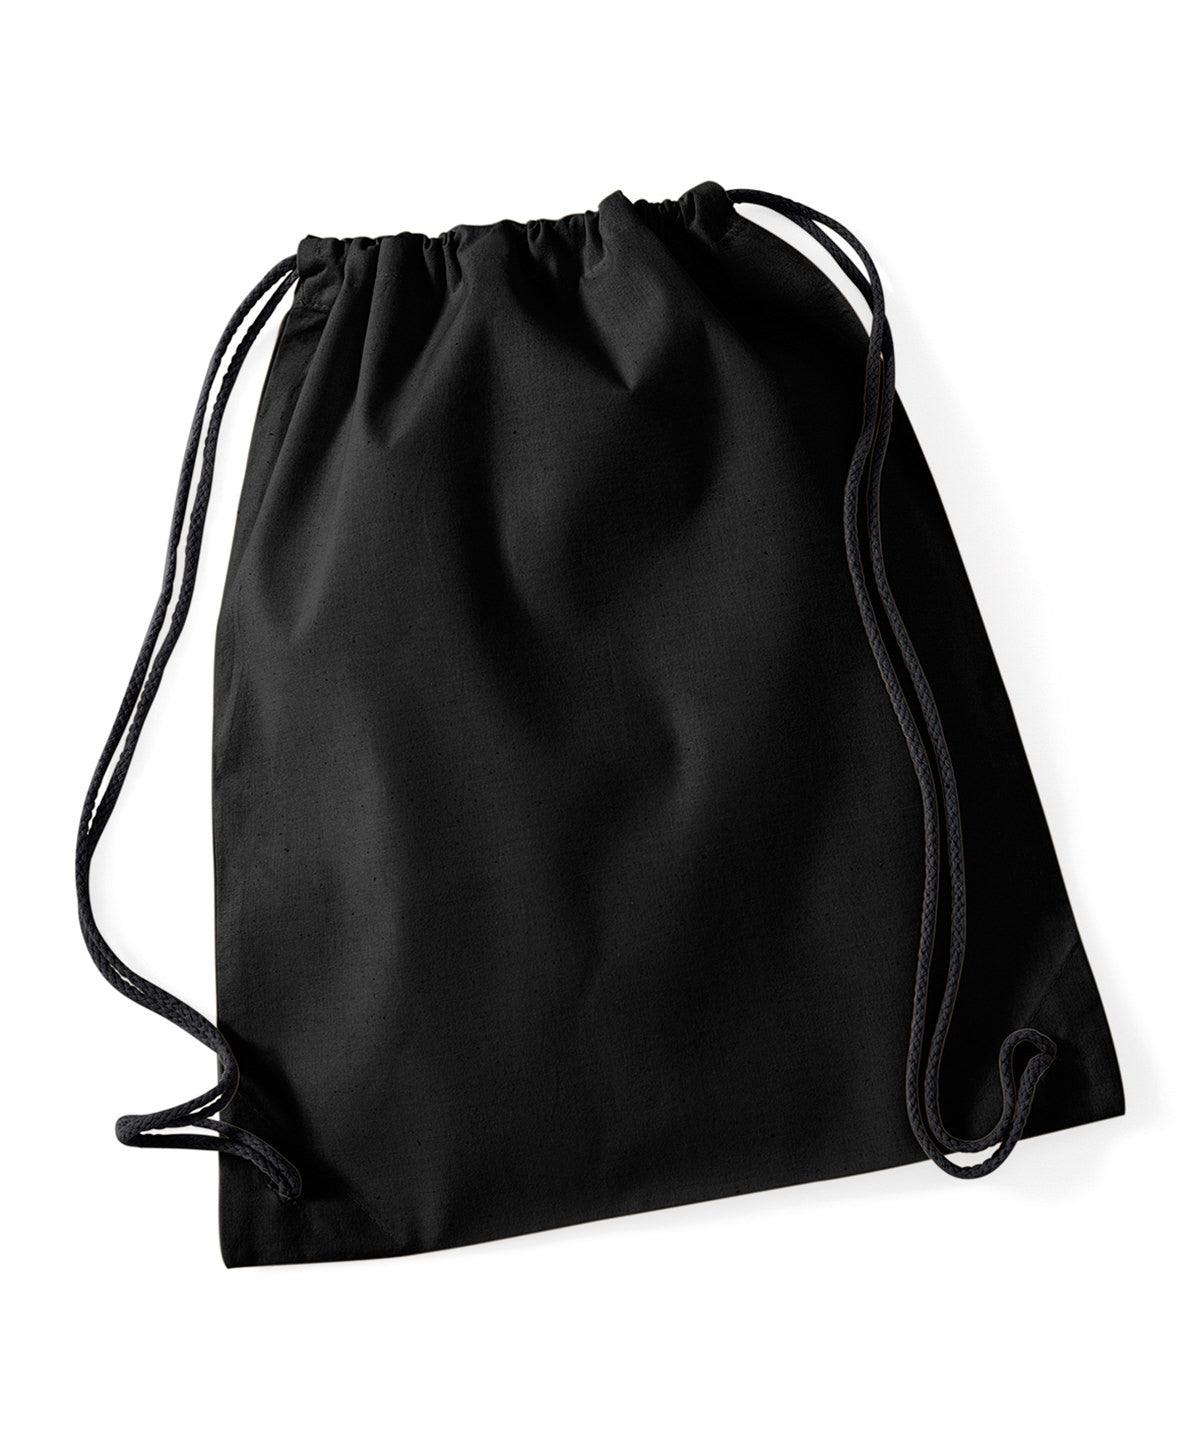 Black/Black - Cotton gymsac Bags Westford Mill Bags & Luggage, Junior, Must Haves, Pastels and Tie Dye Schoolwear Centres